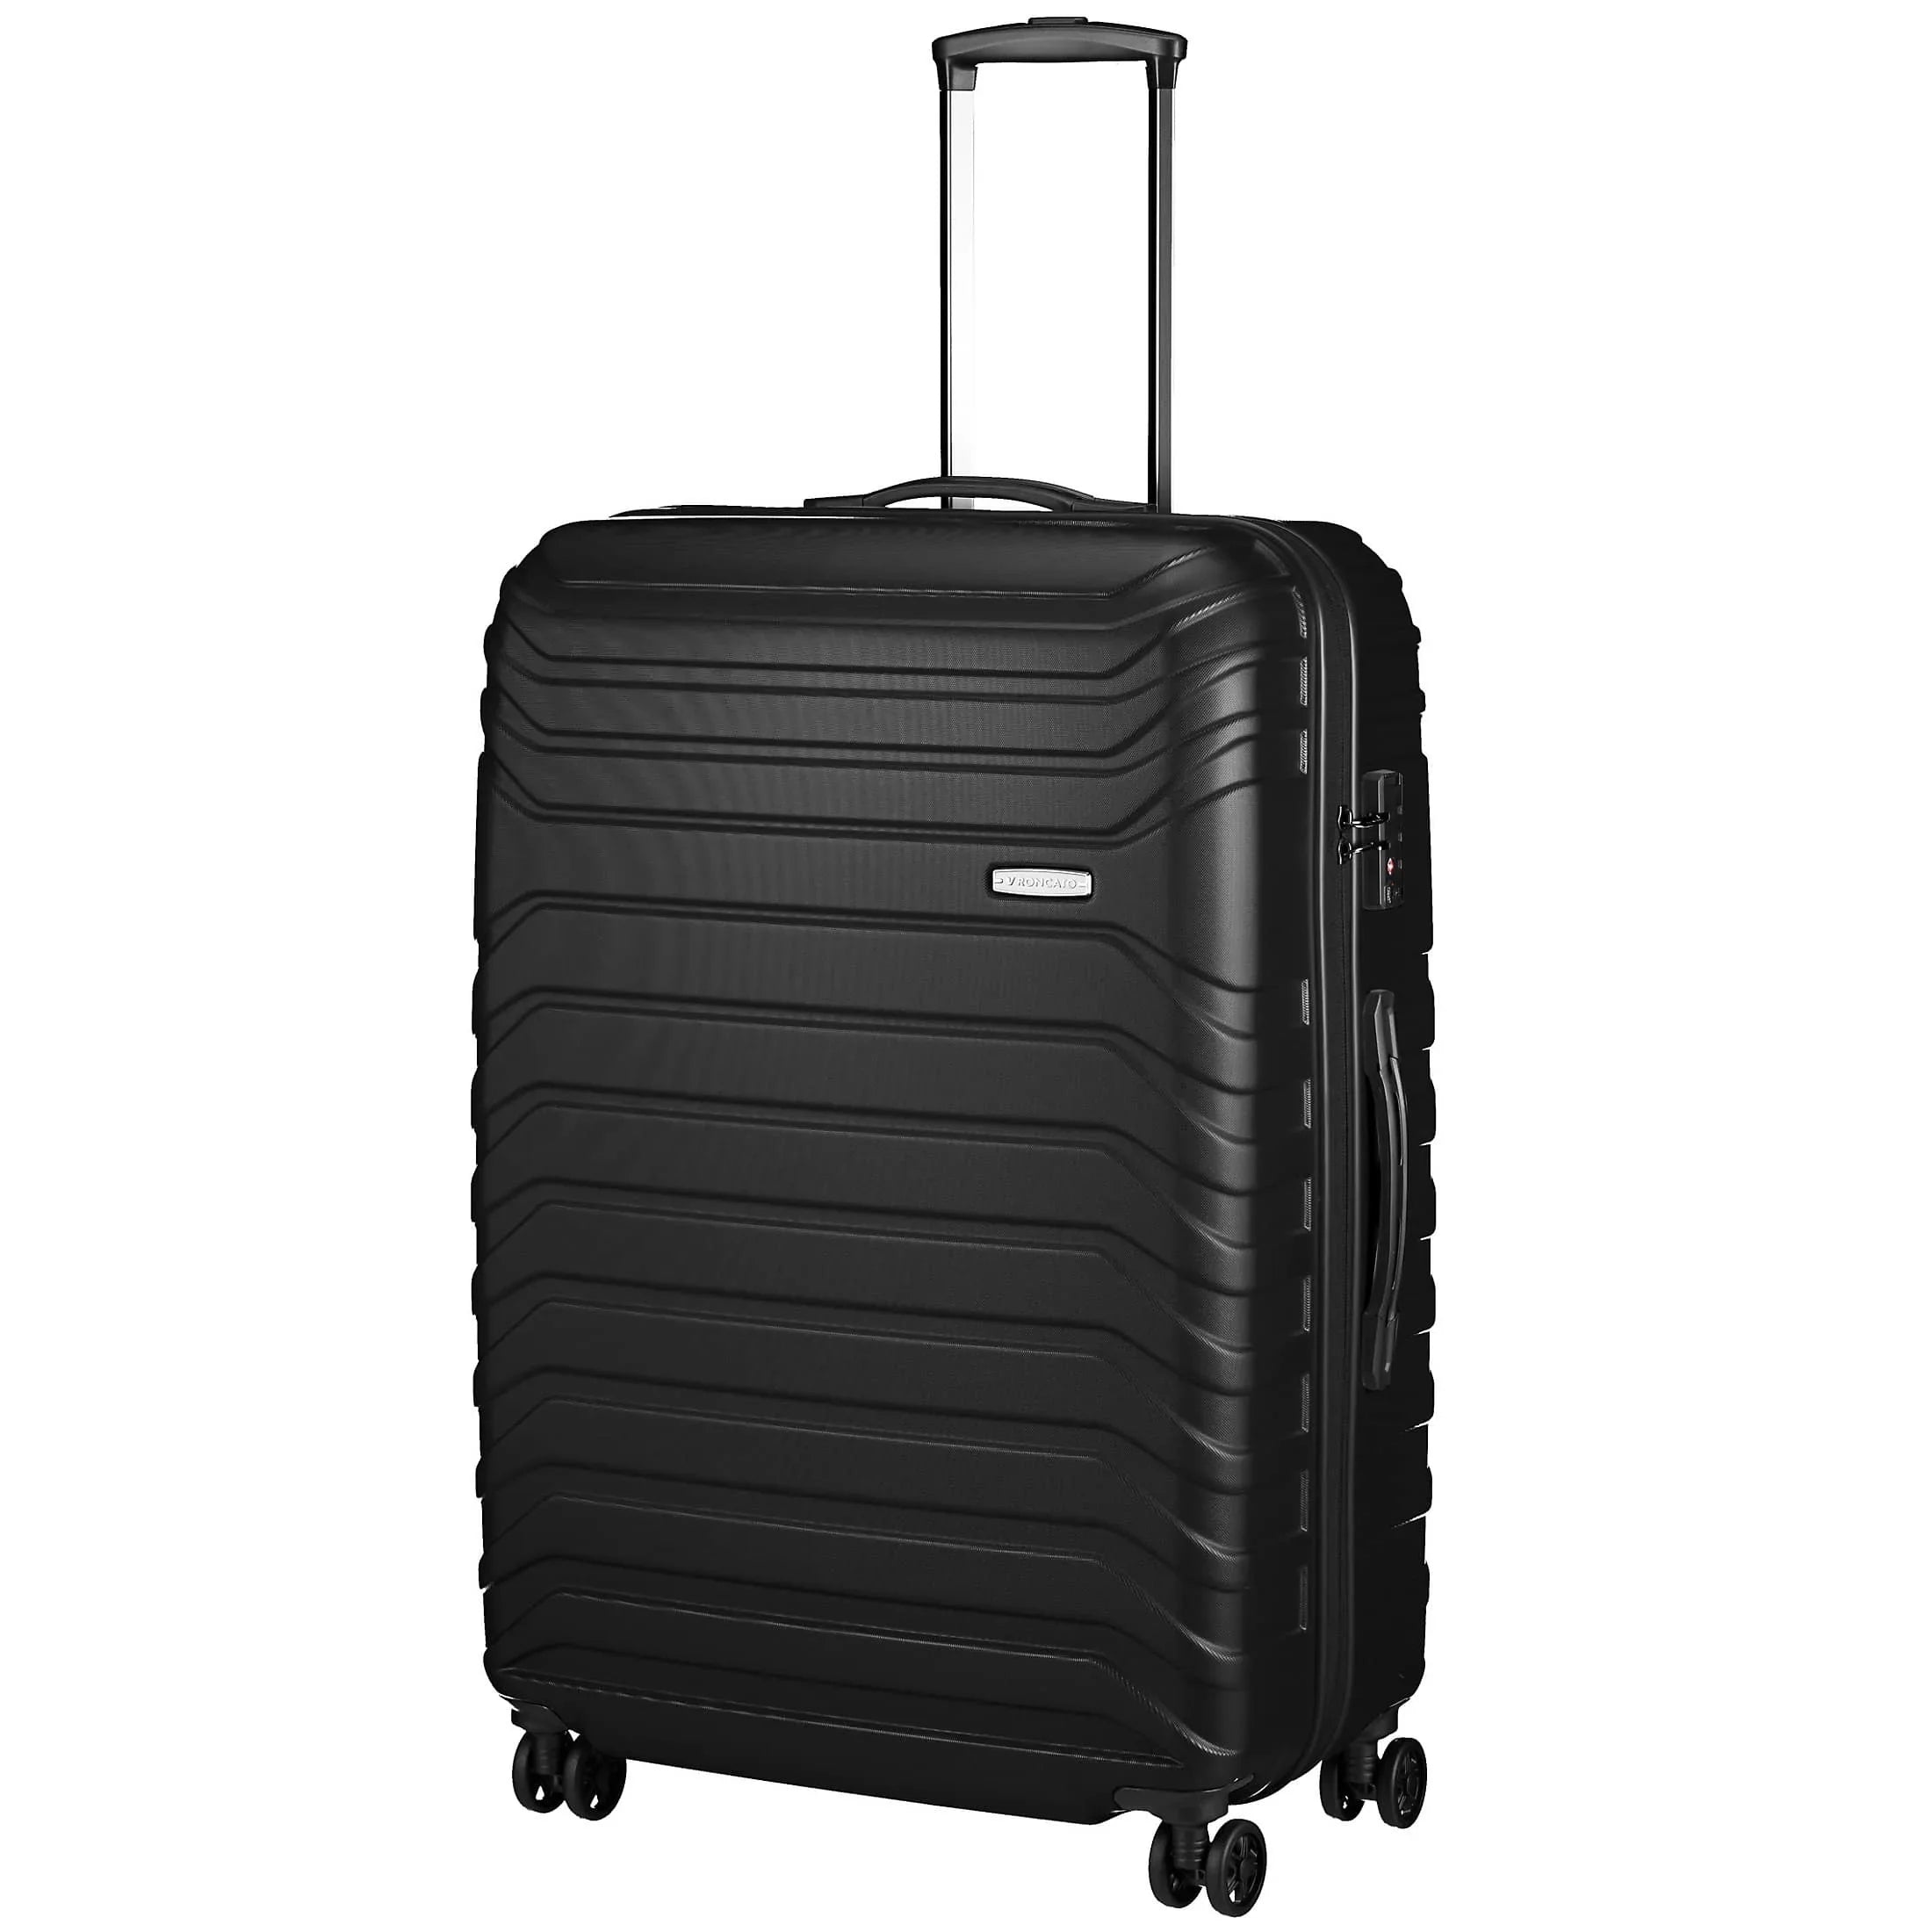 2 for Page modern Roncato and – Italy! business luggage from vacation -